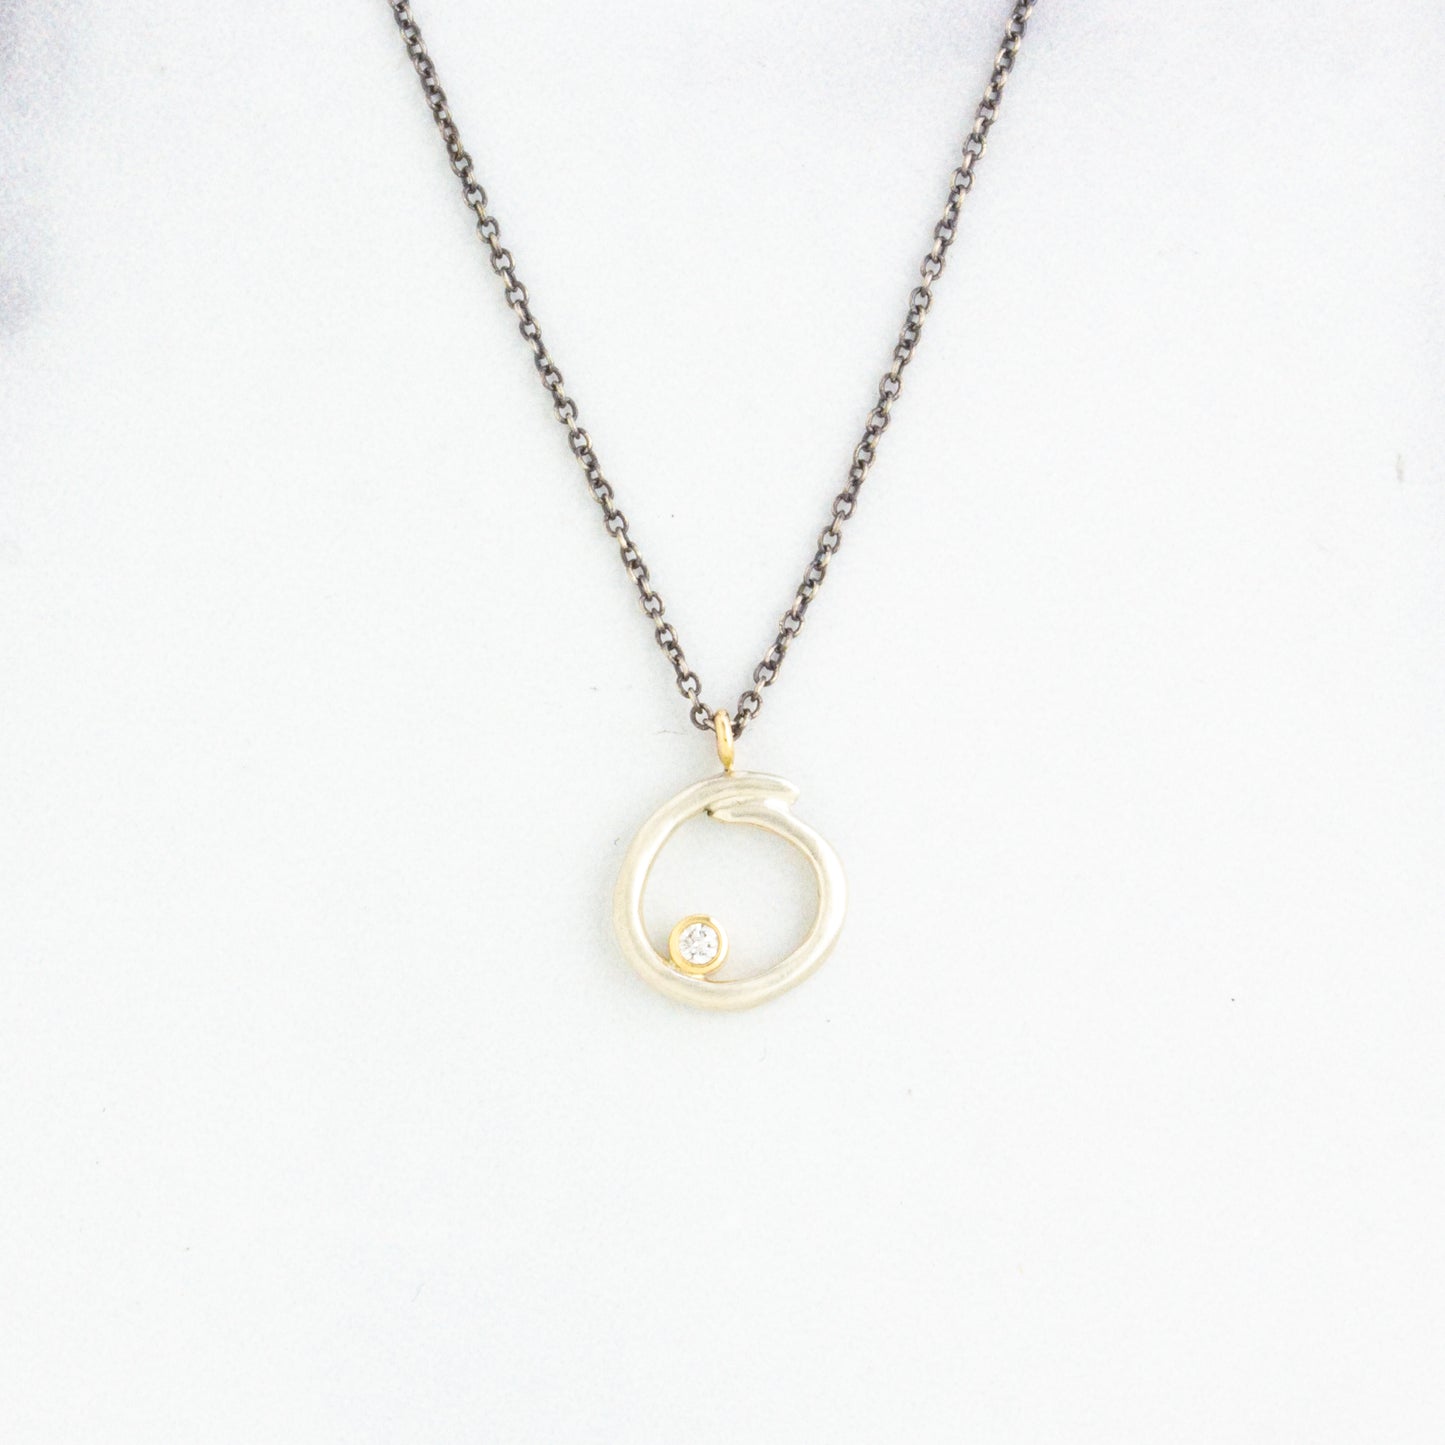 Oxidized Sterling & 14K Gold Diamond Organic Curl Necklace